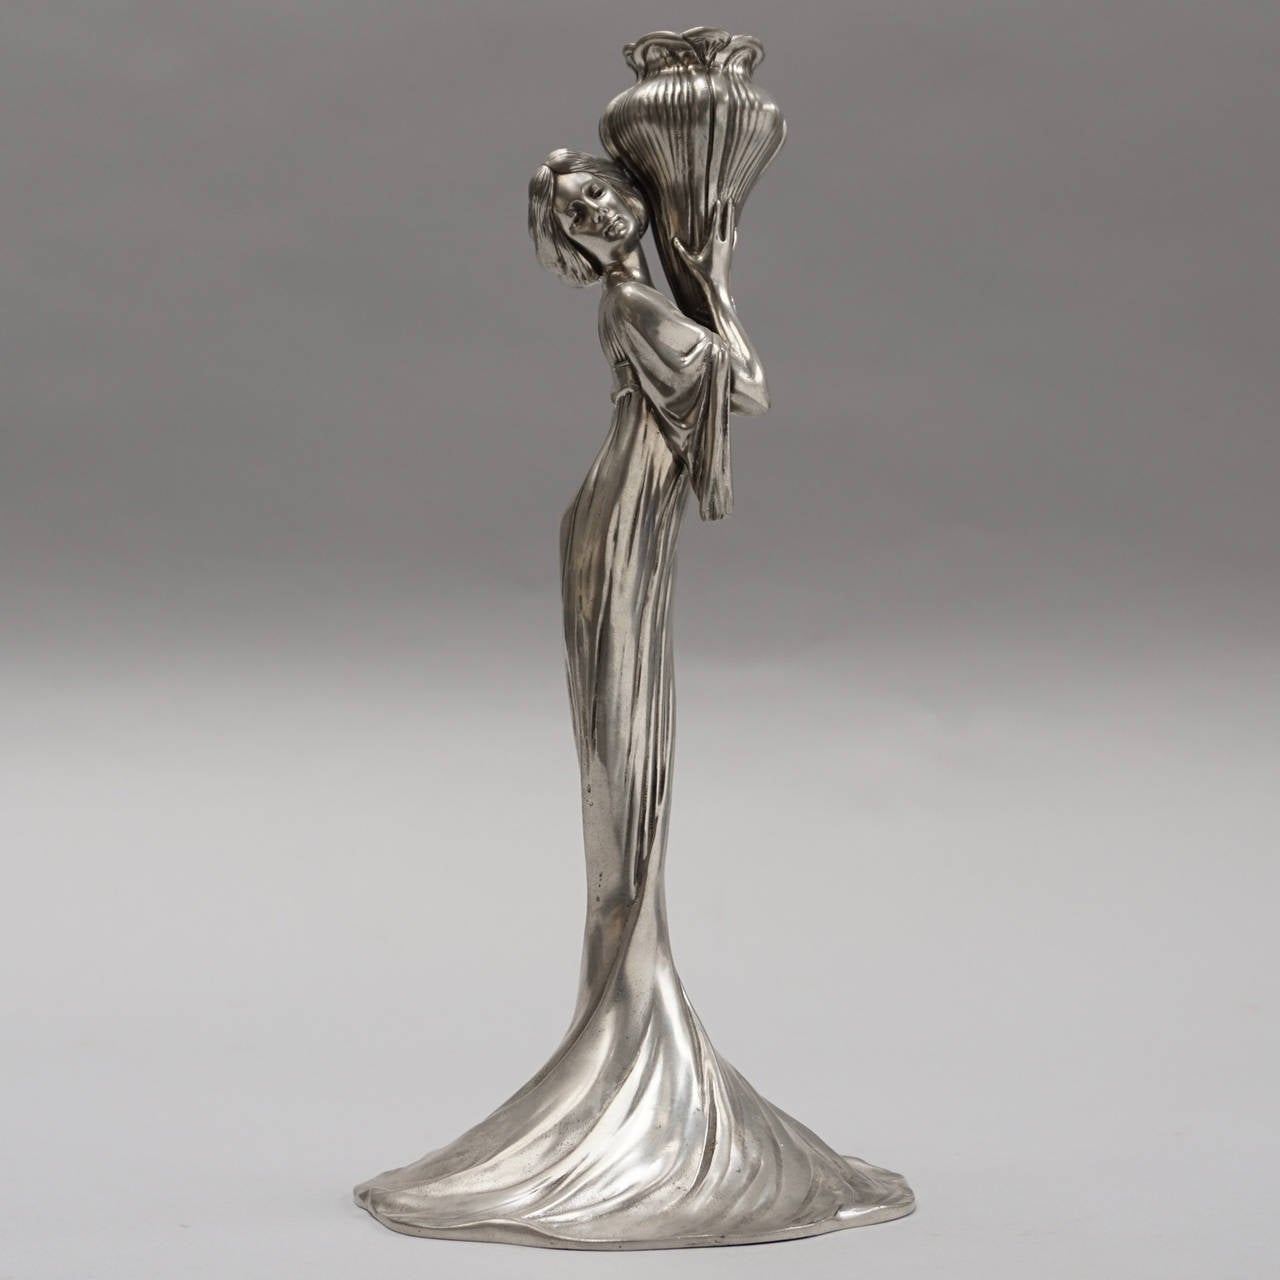 Delightful elegant maiden candlestick holder of silver plate Brittania metal. Manufactured by WMF in 1906.